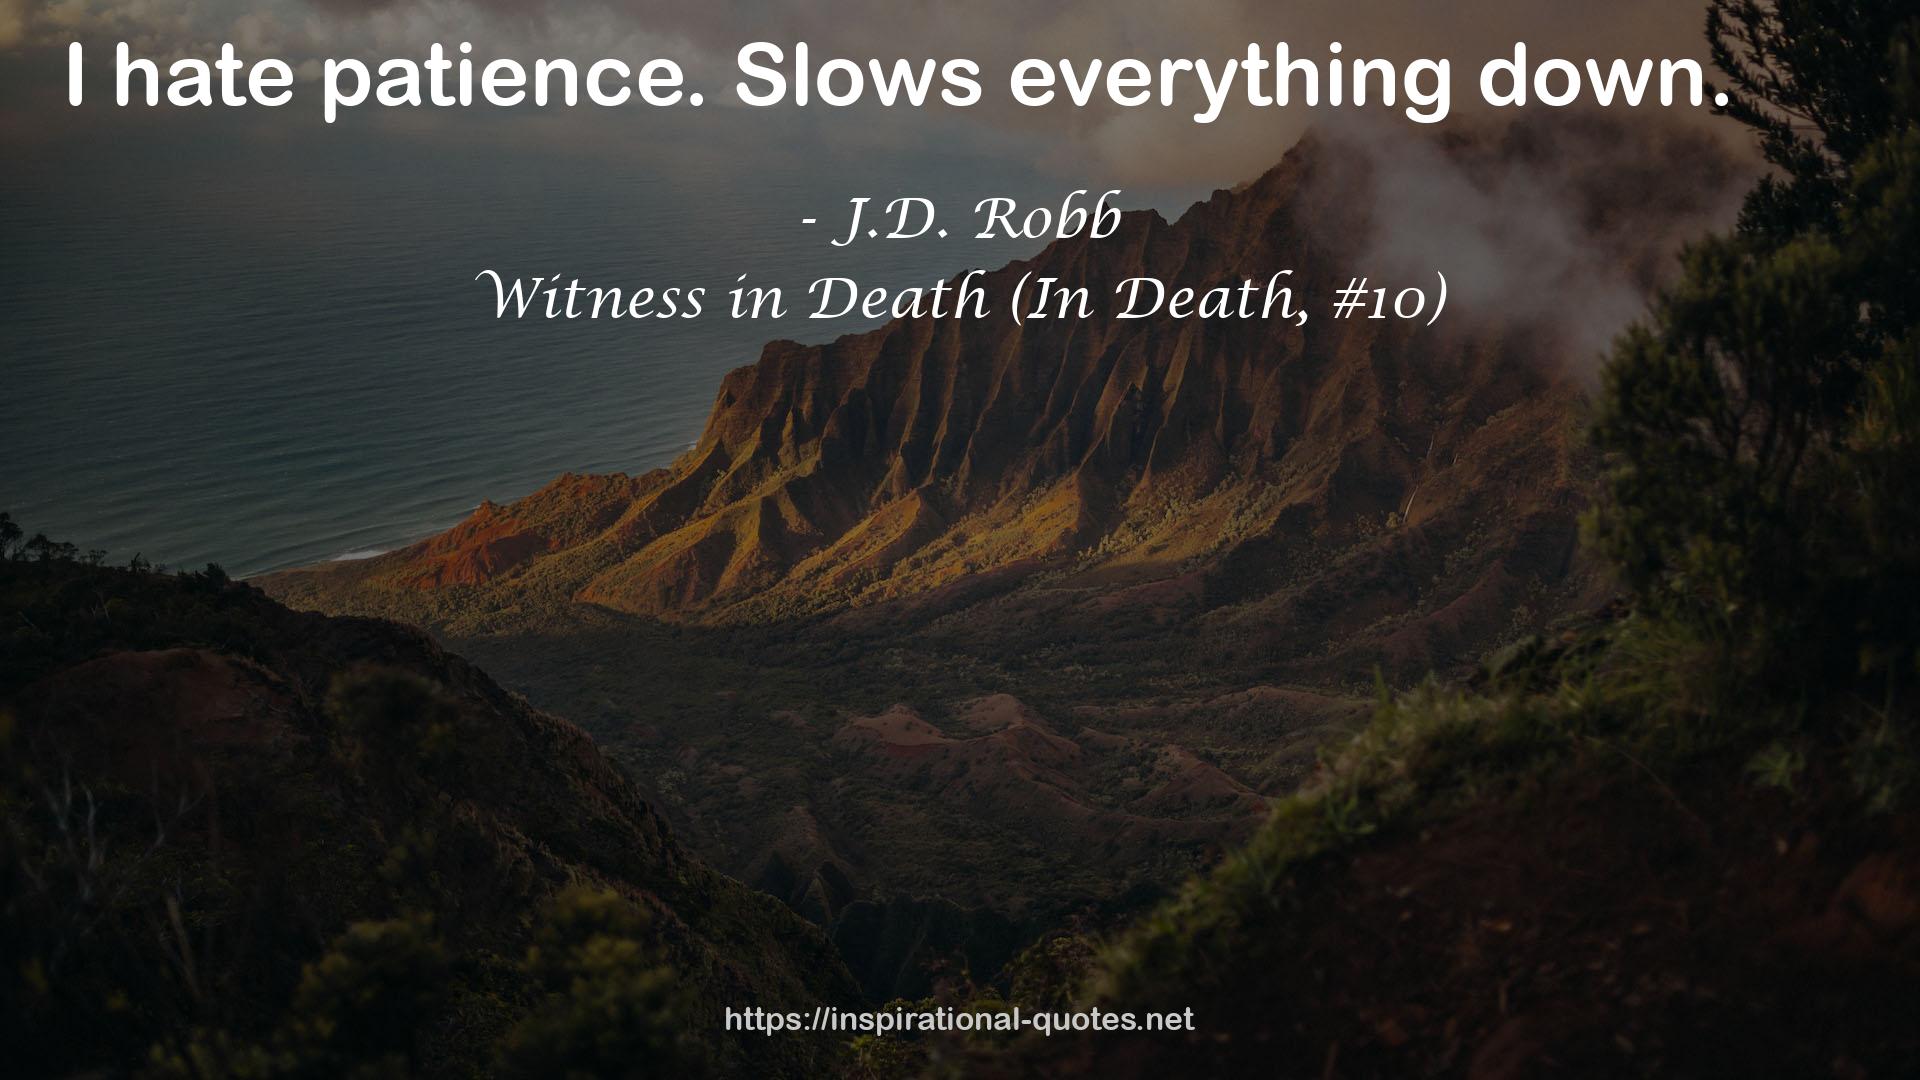 Witness in Death (In Death, #10) QUOTES